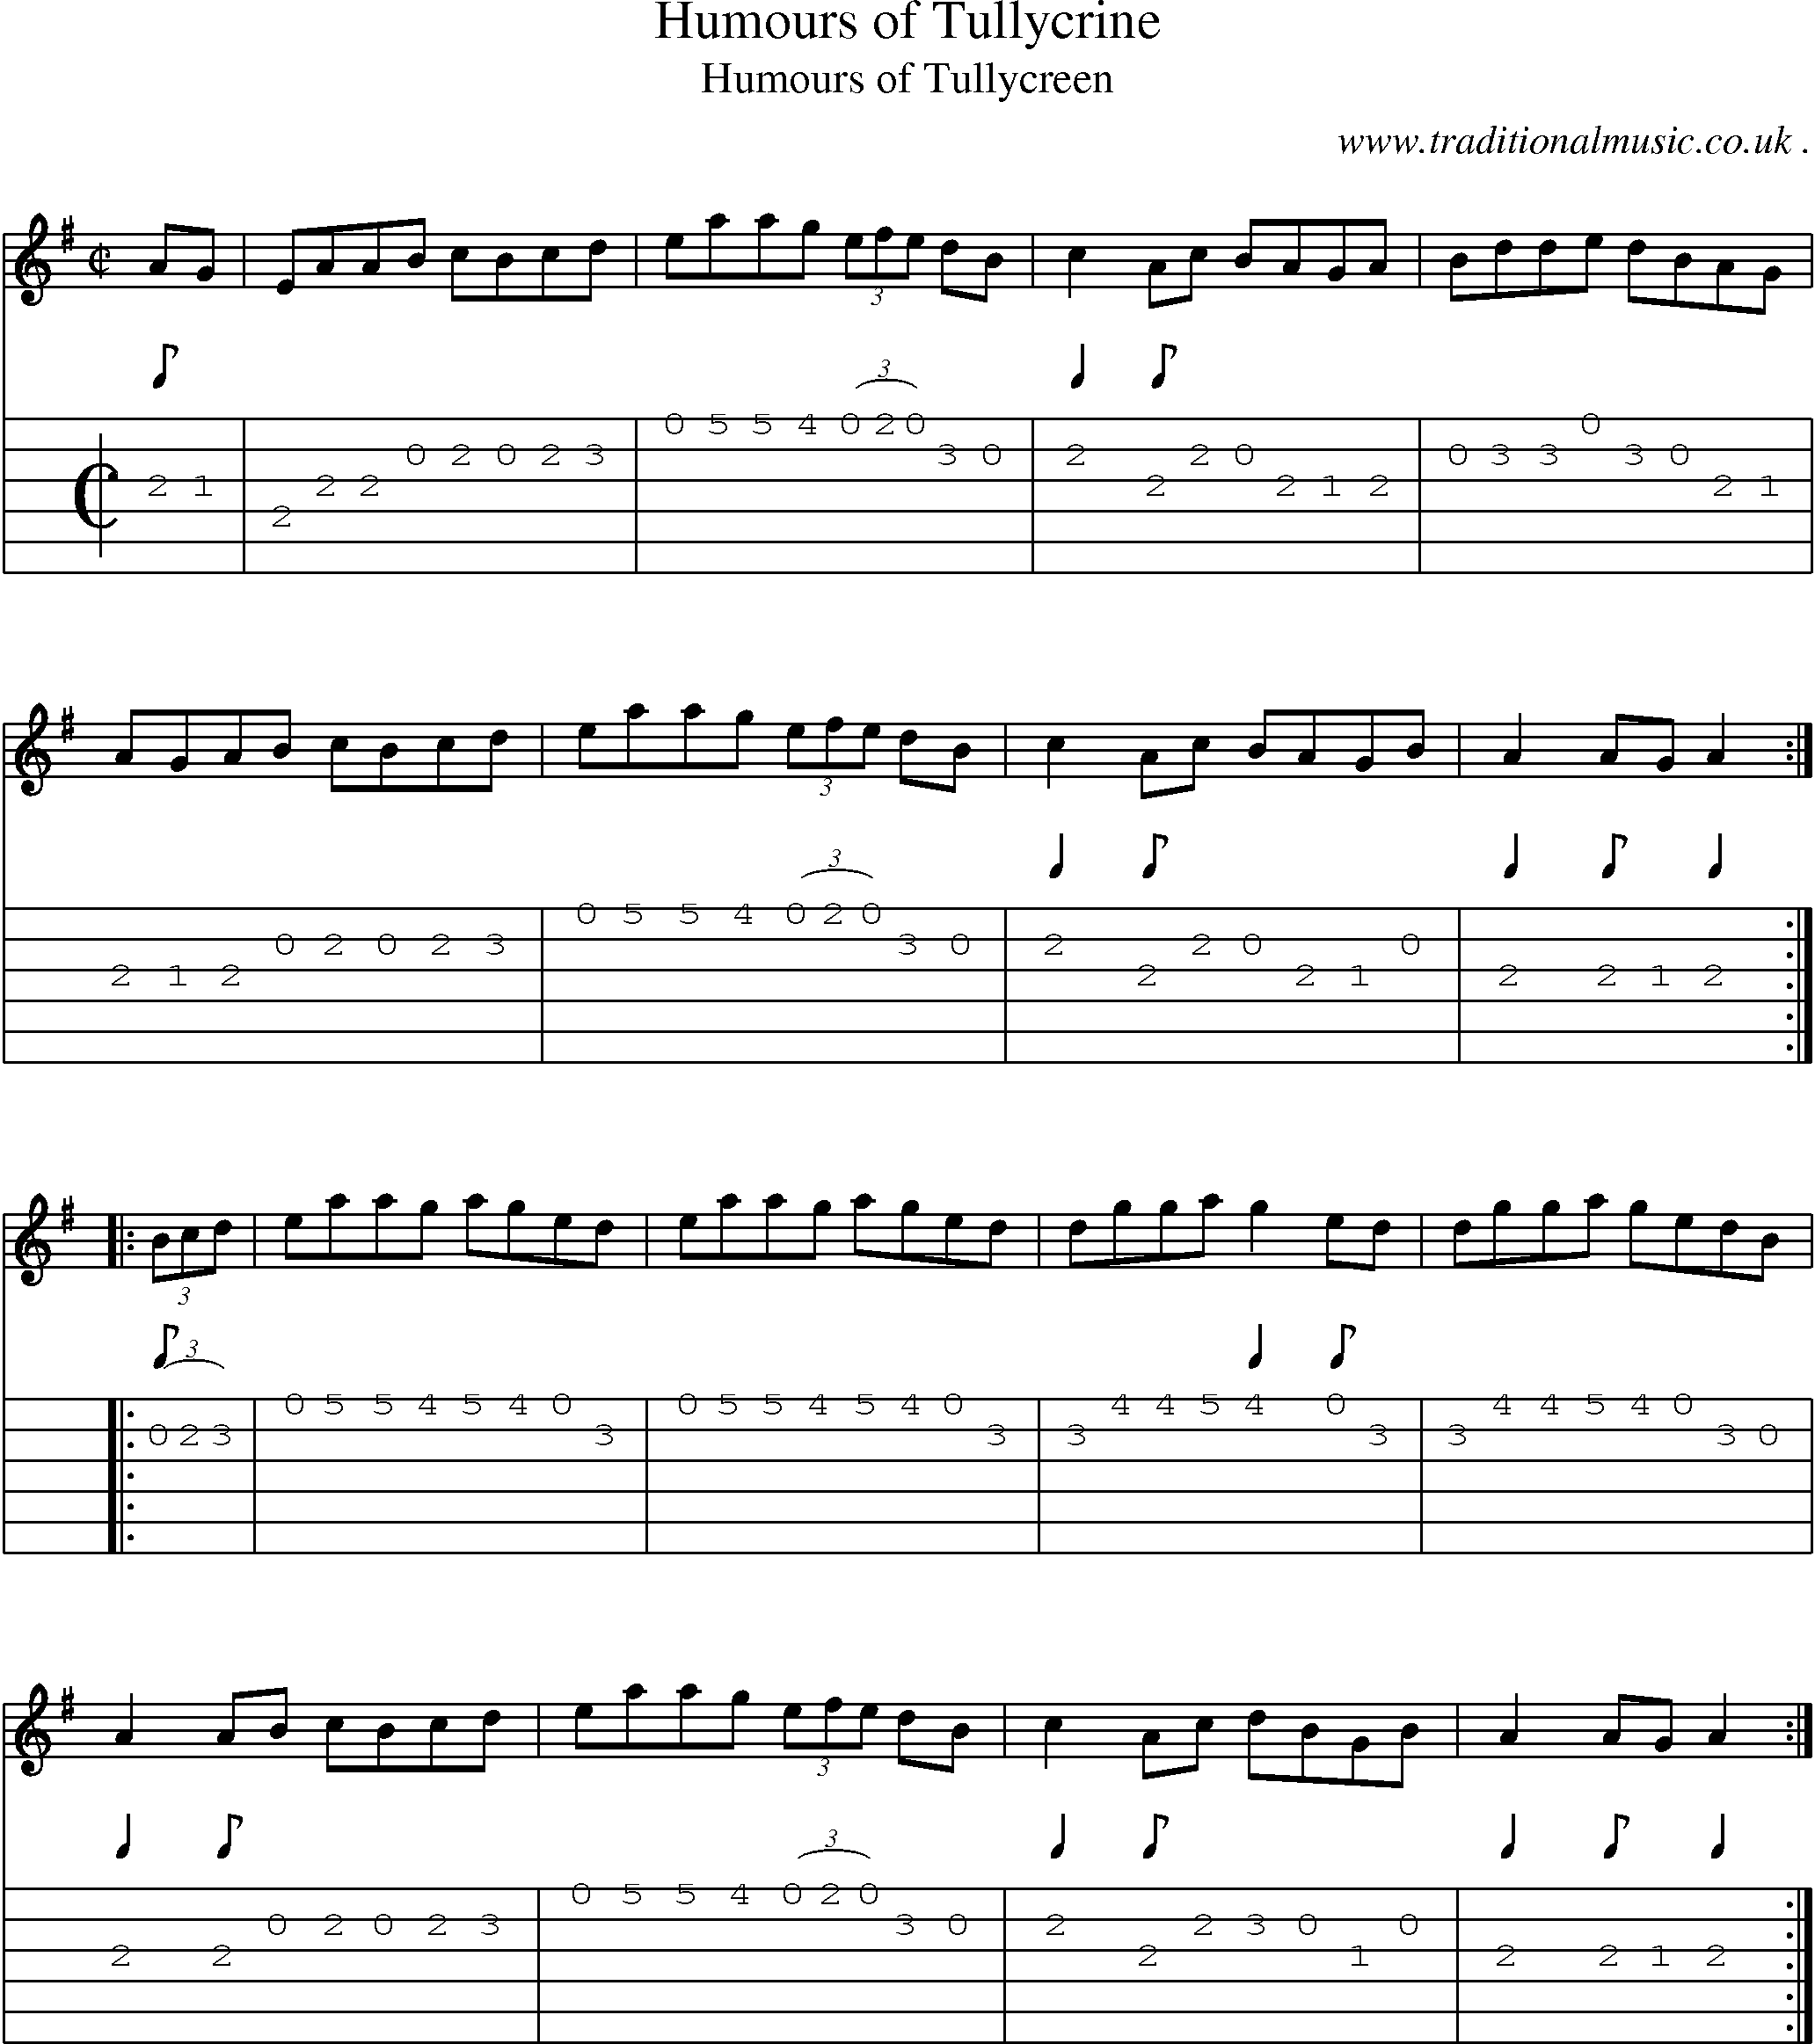 Sheet-Music and Guitar Tabs for Humours Of Tullycrine